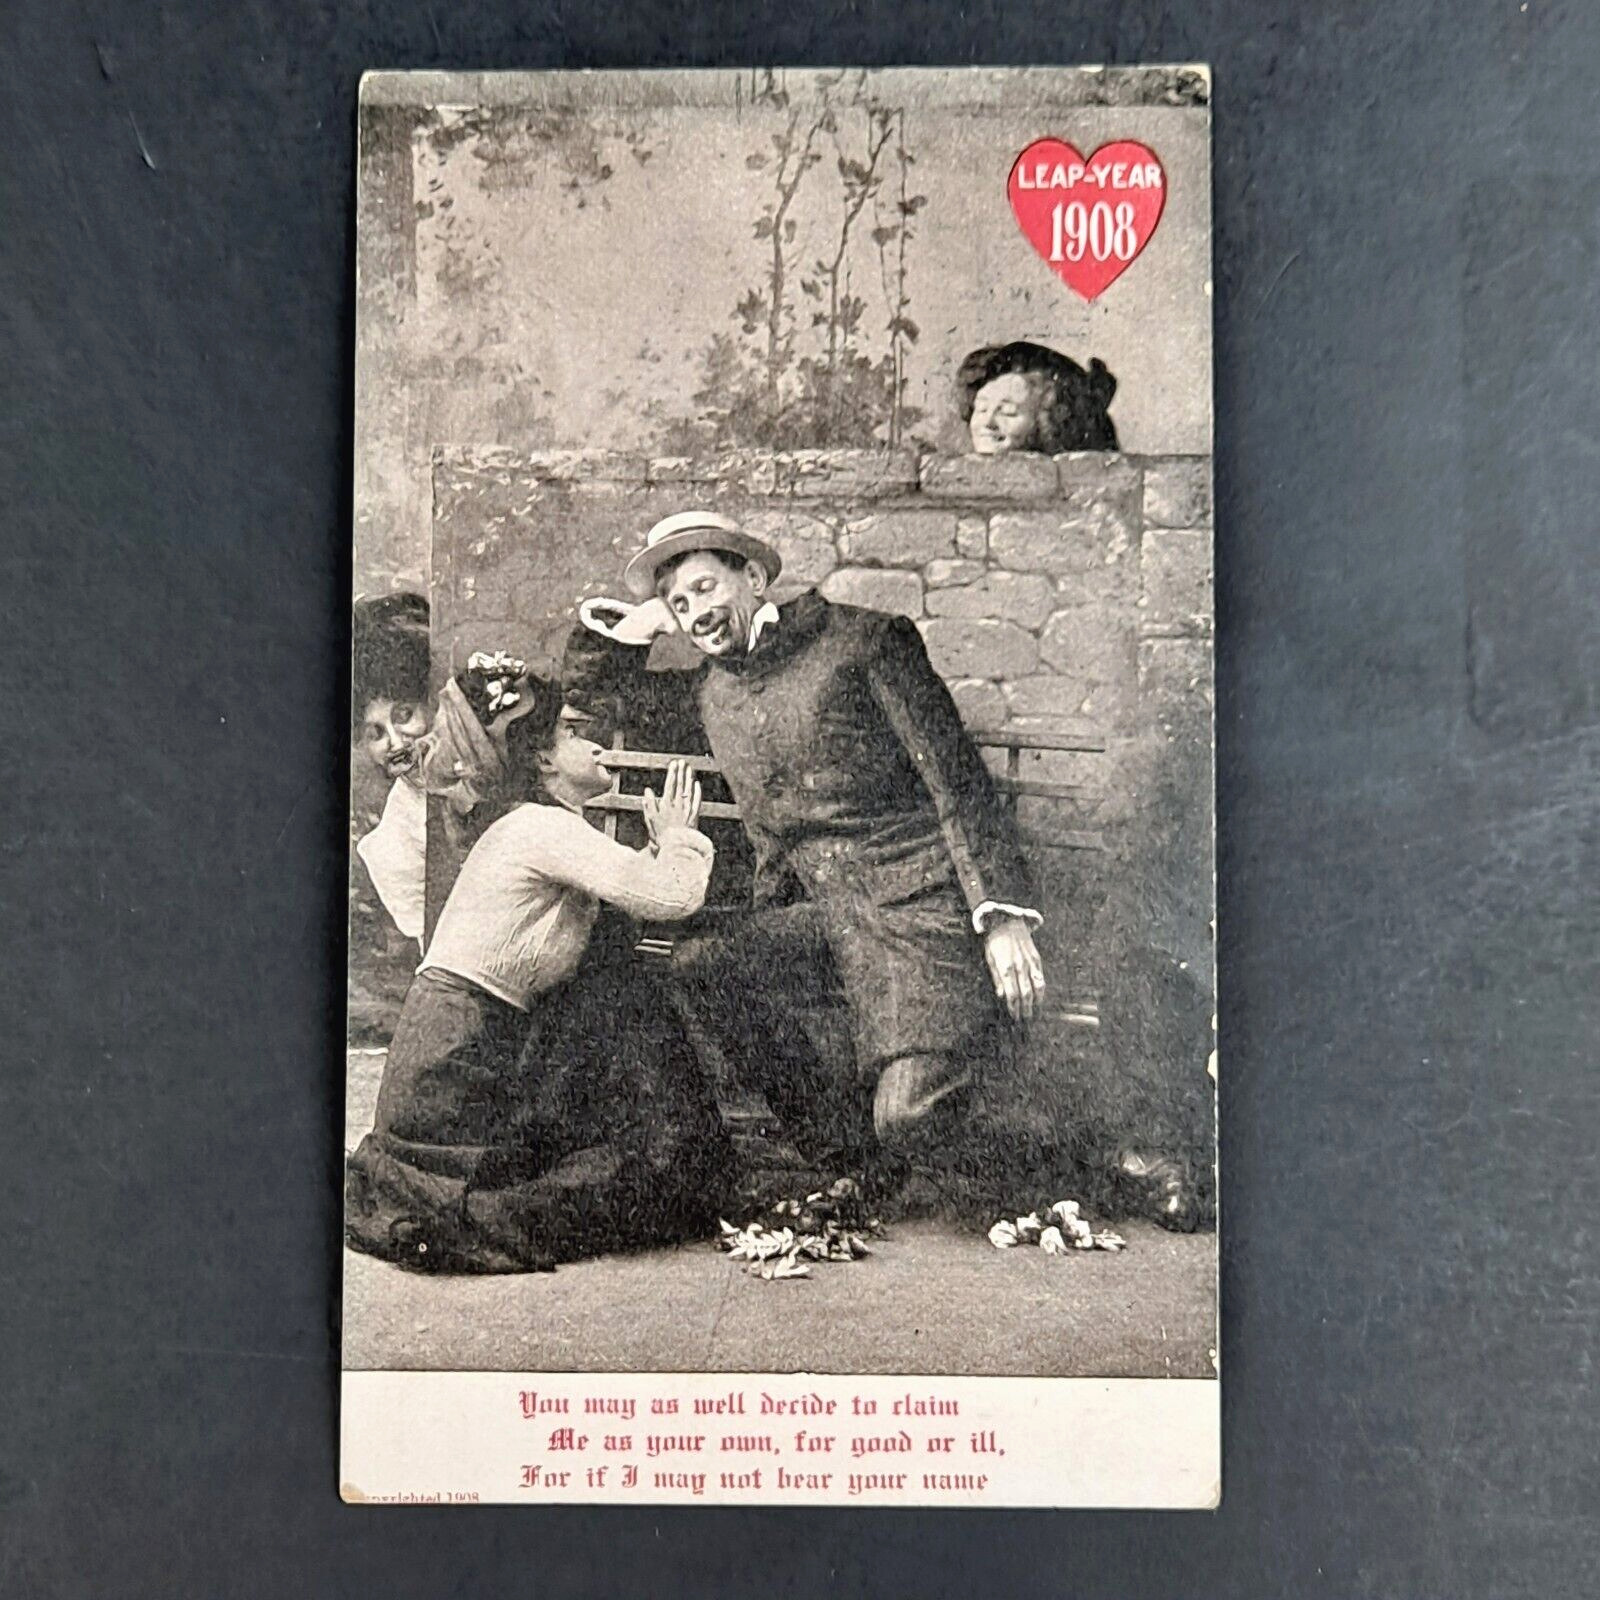 ANTIQUE 1908 POST CARD ROMANCE LEAP YEAR PEEKING COURTSHIP POSTCARD - POSTED